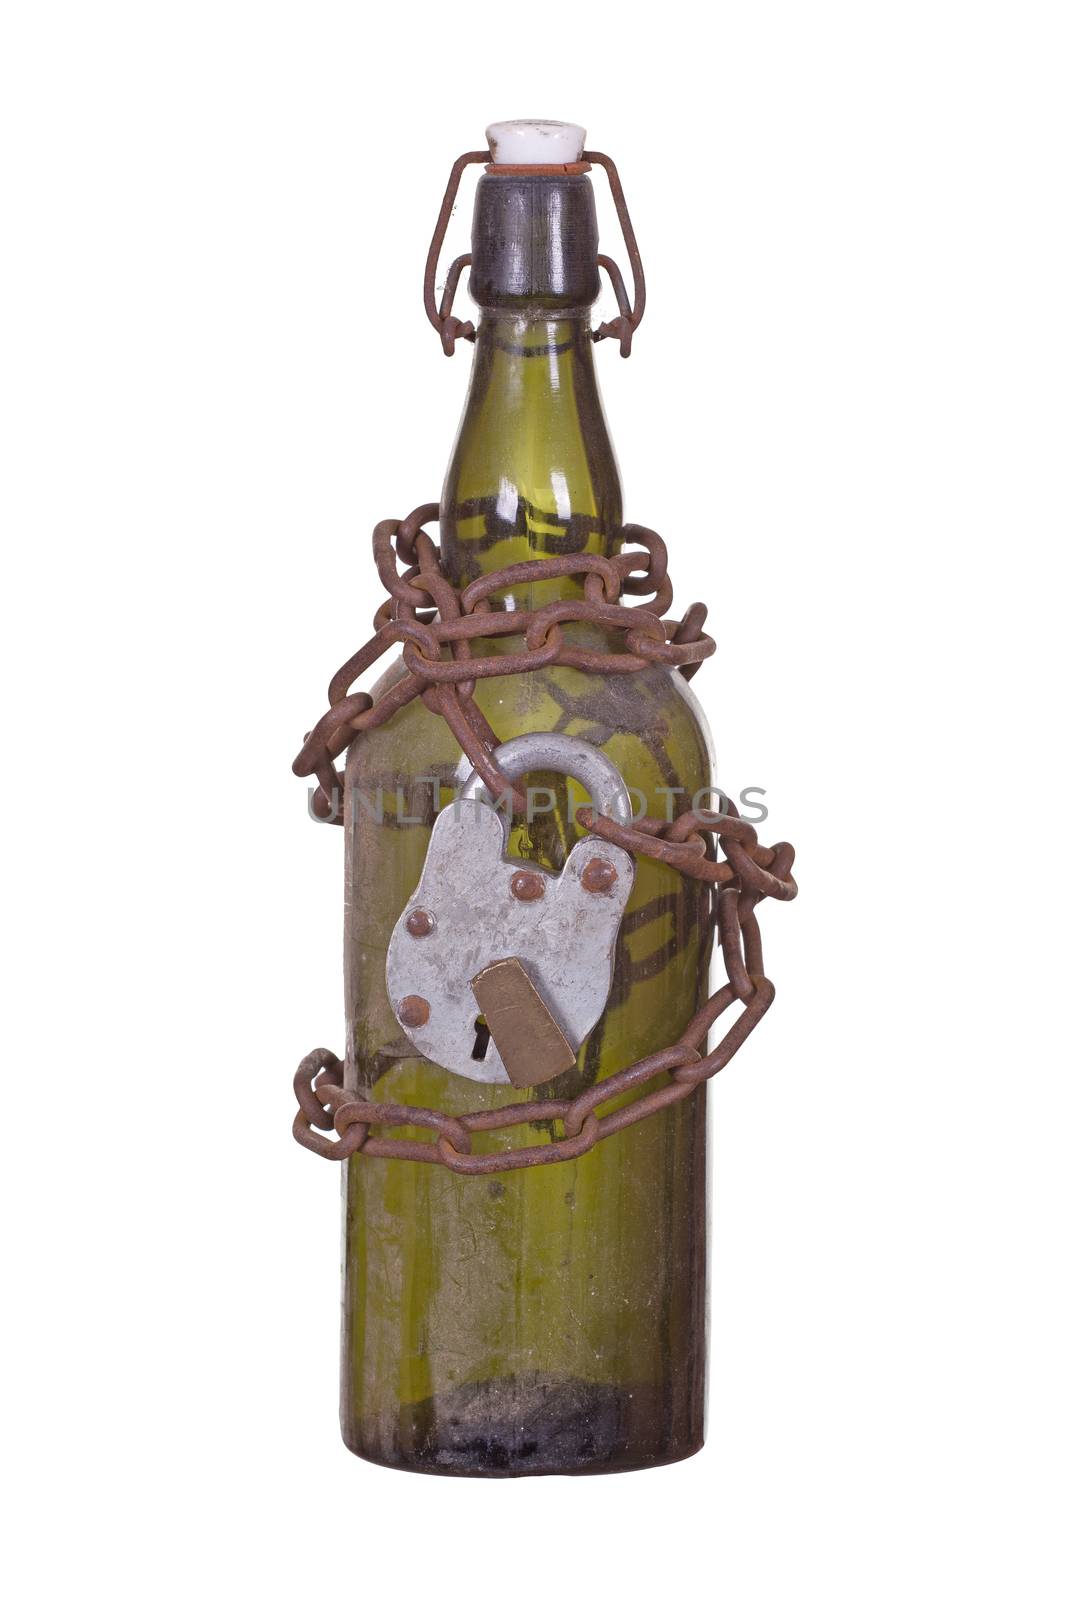 old bottle captured with chain and padlock by pterwort